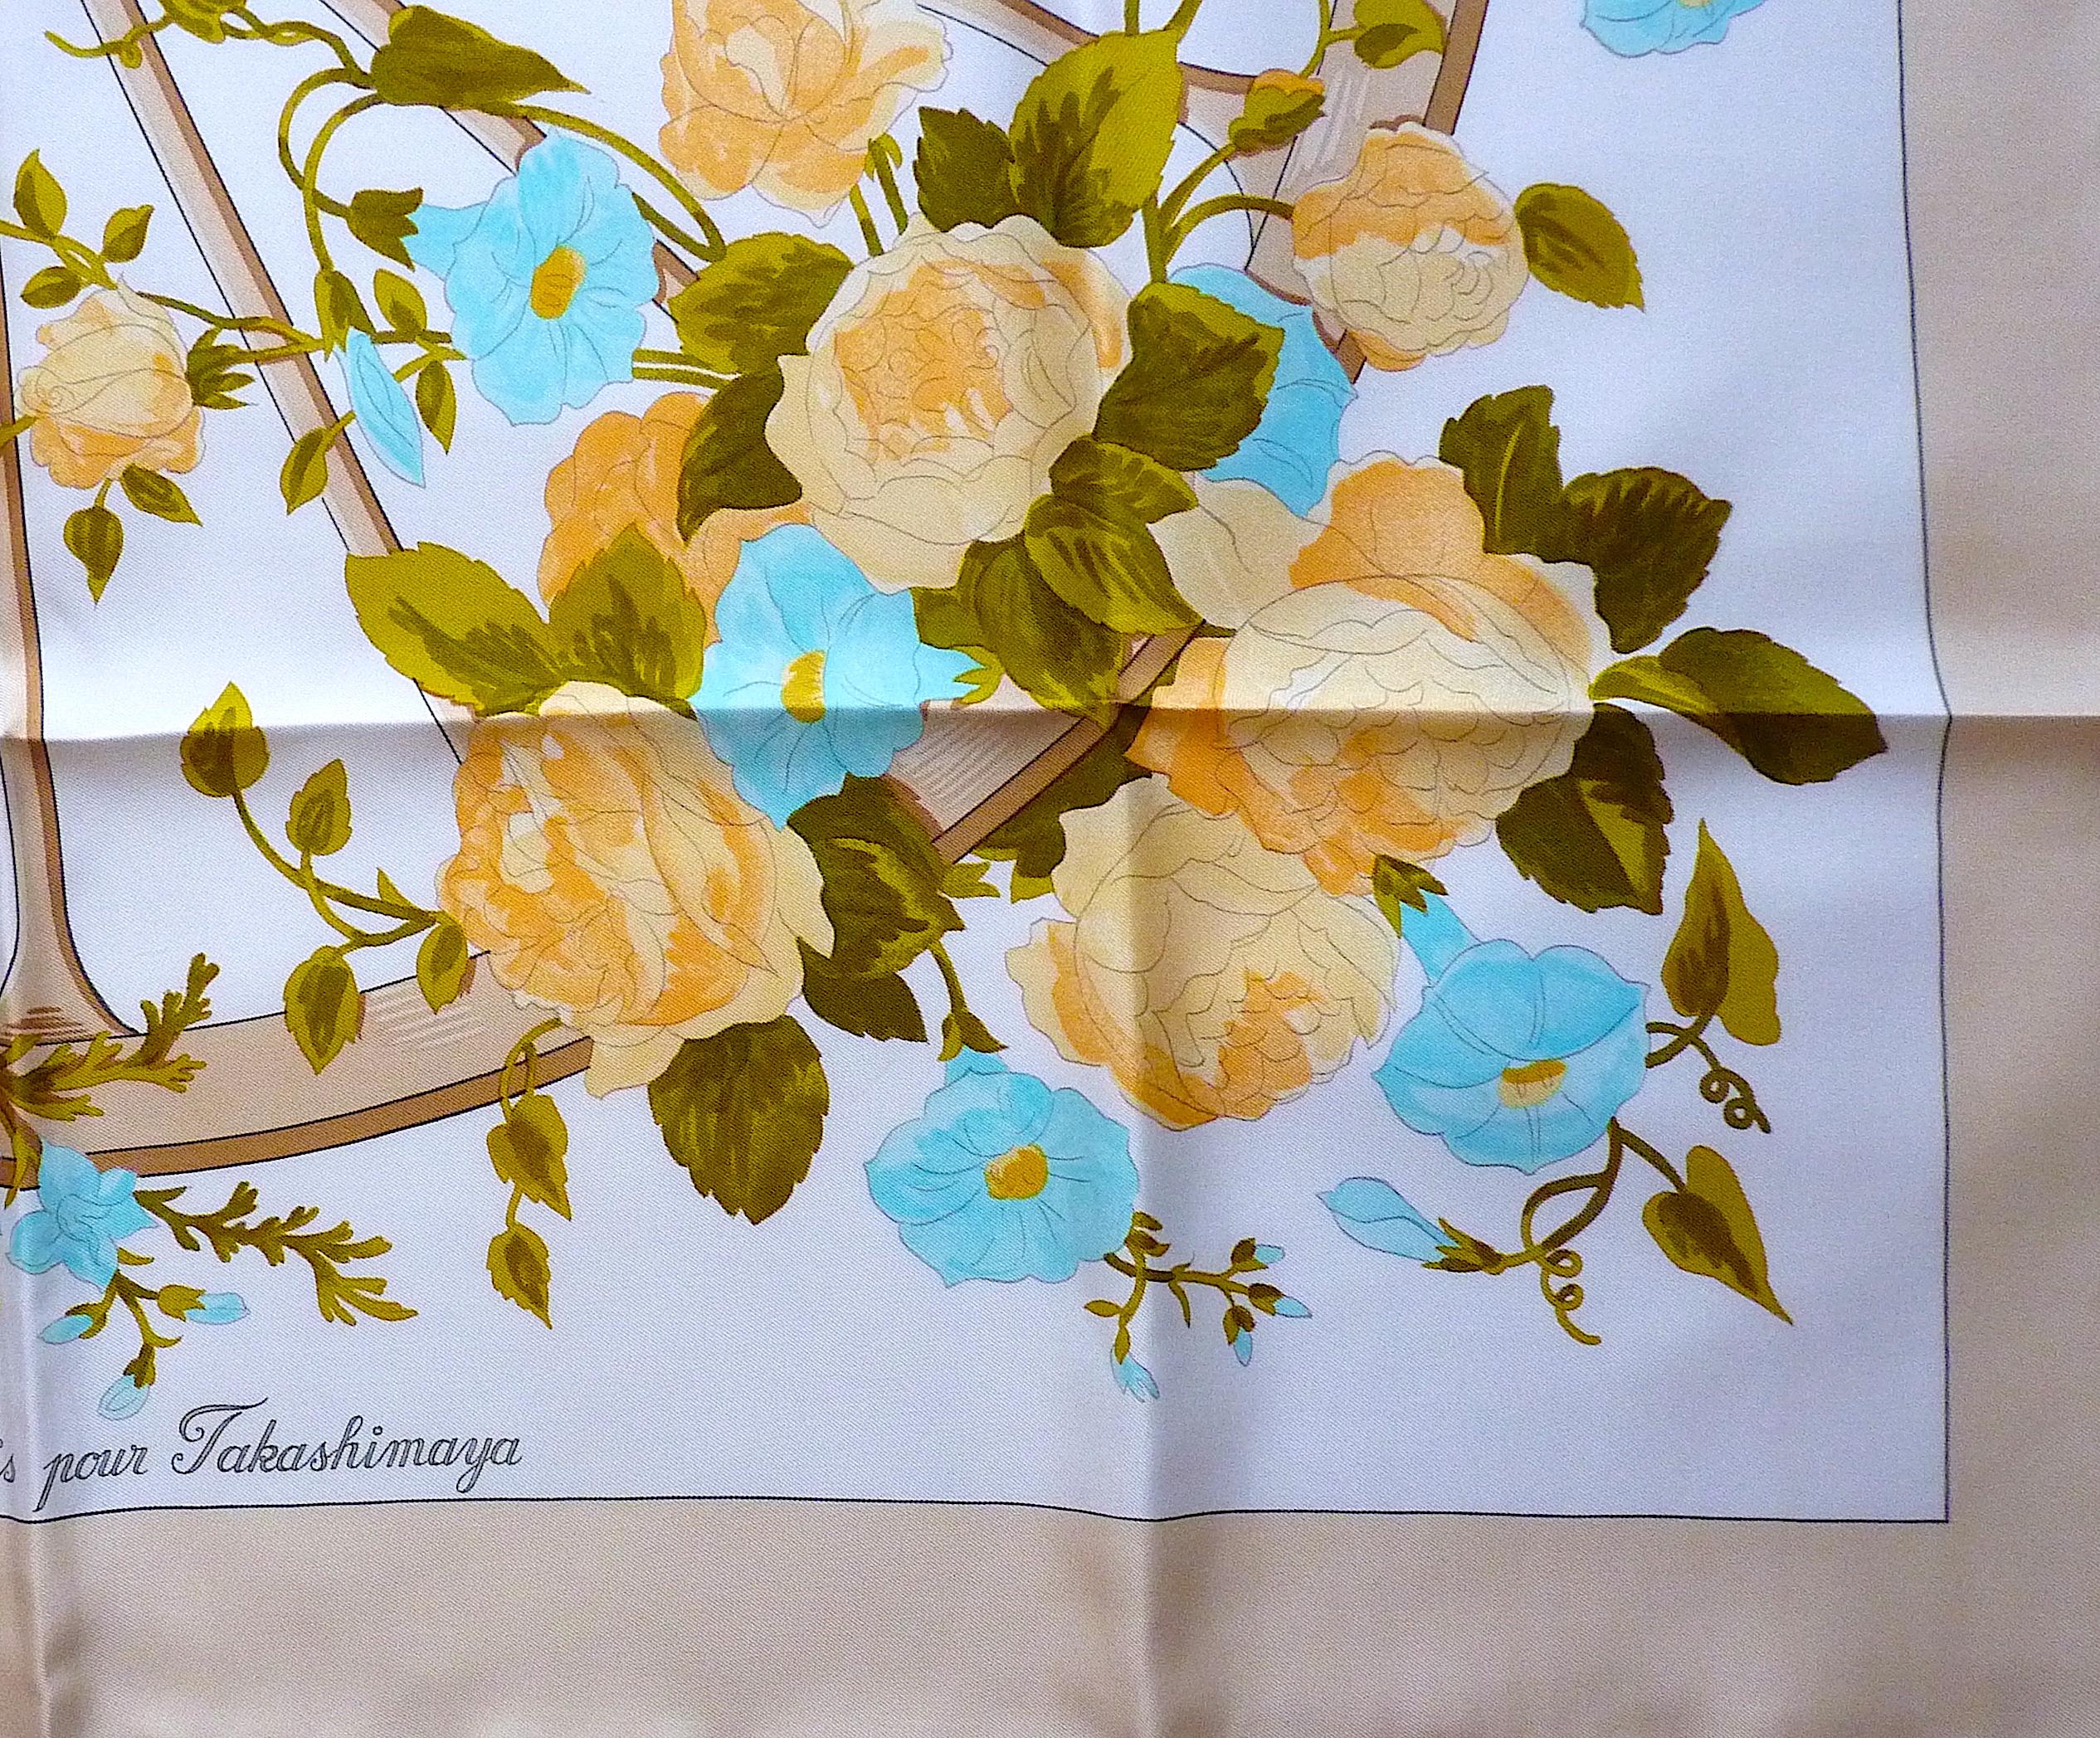 Hermes Scarf Special Edition Romantique for Takashimaya in 1973 1